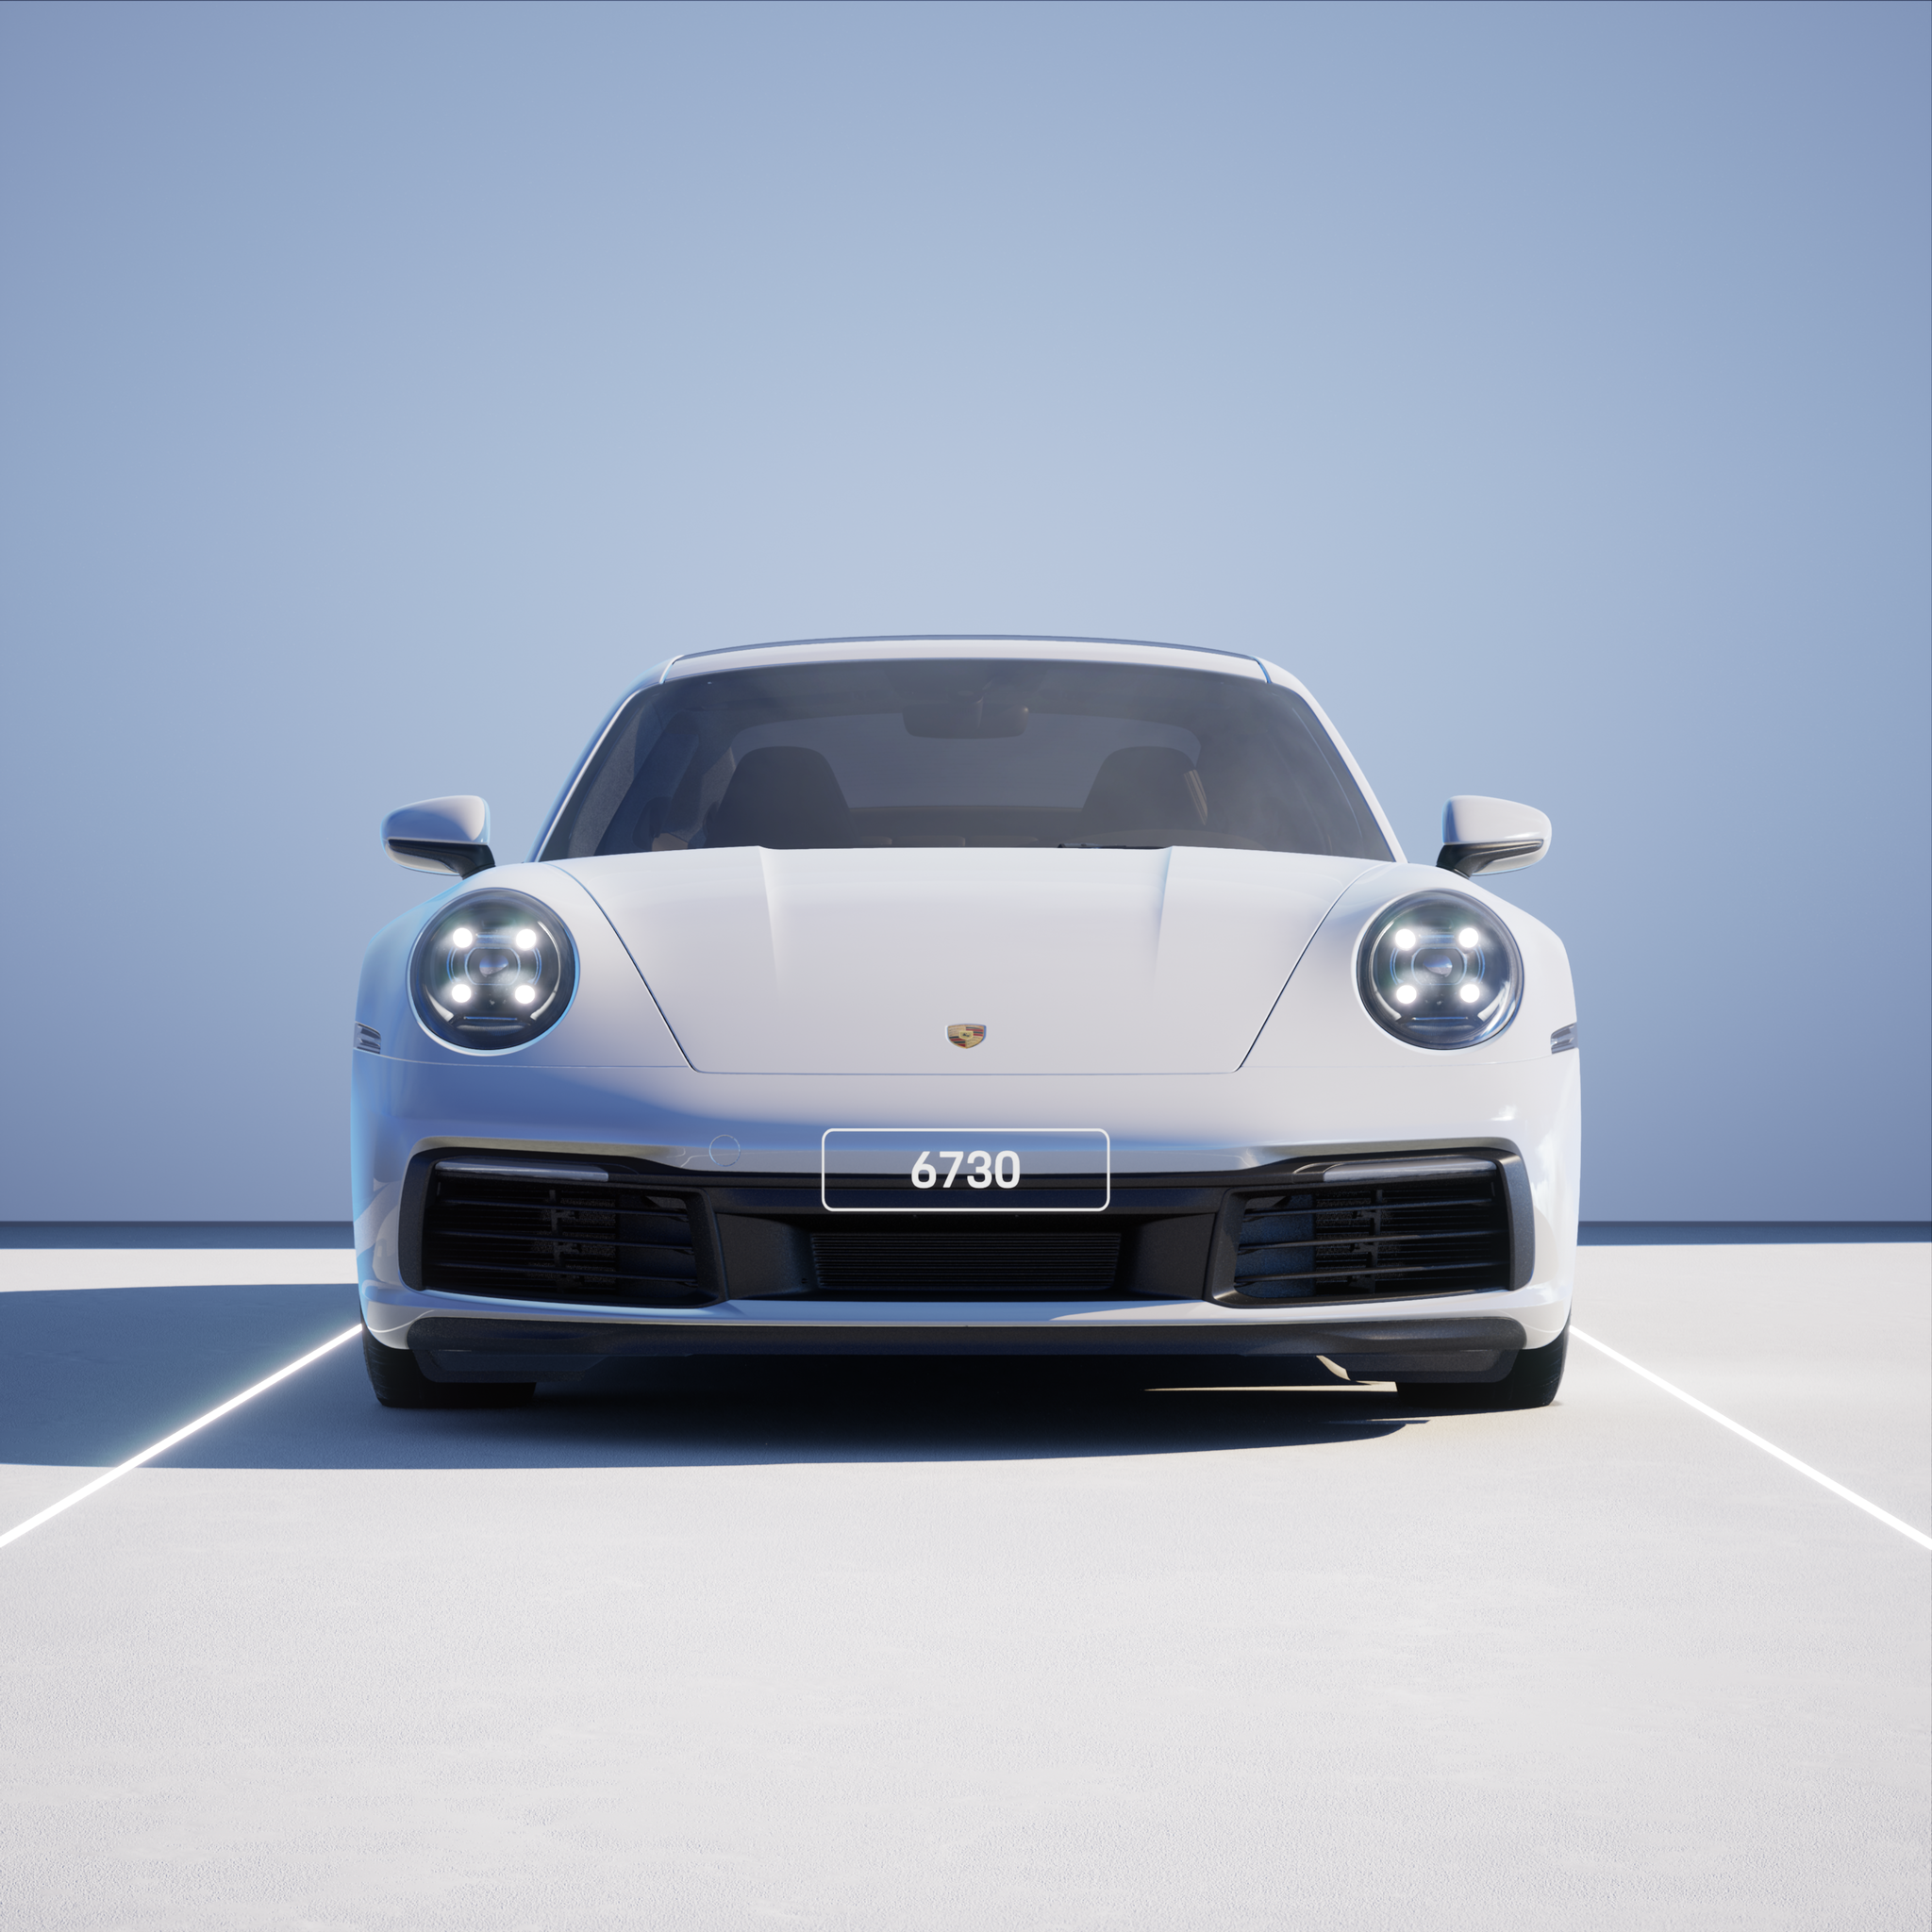 The PORSCHΞ 911 6730 image in phase